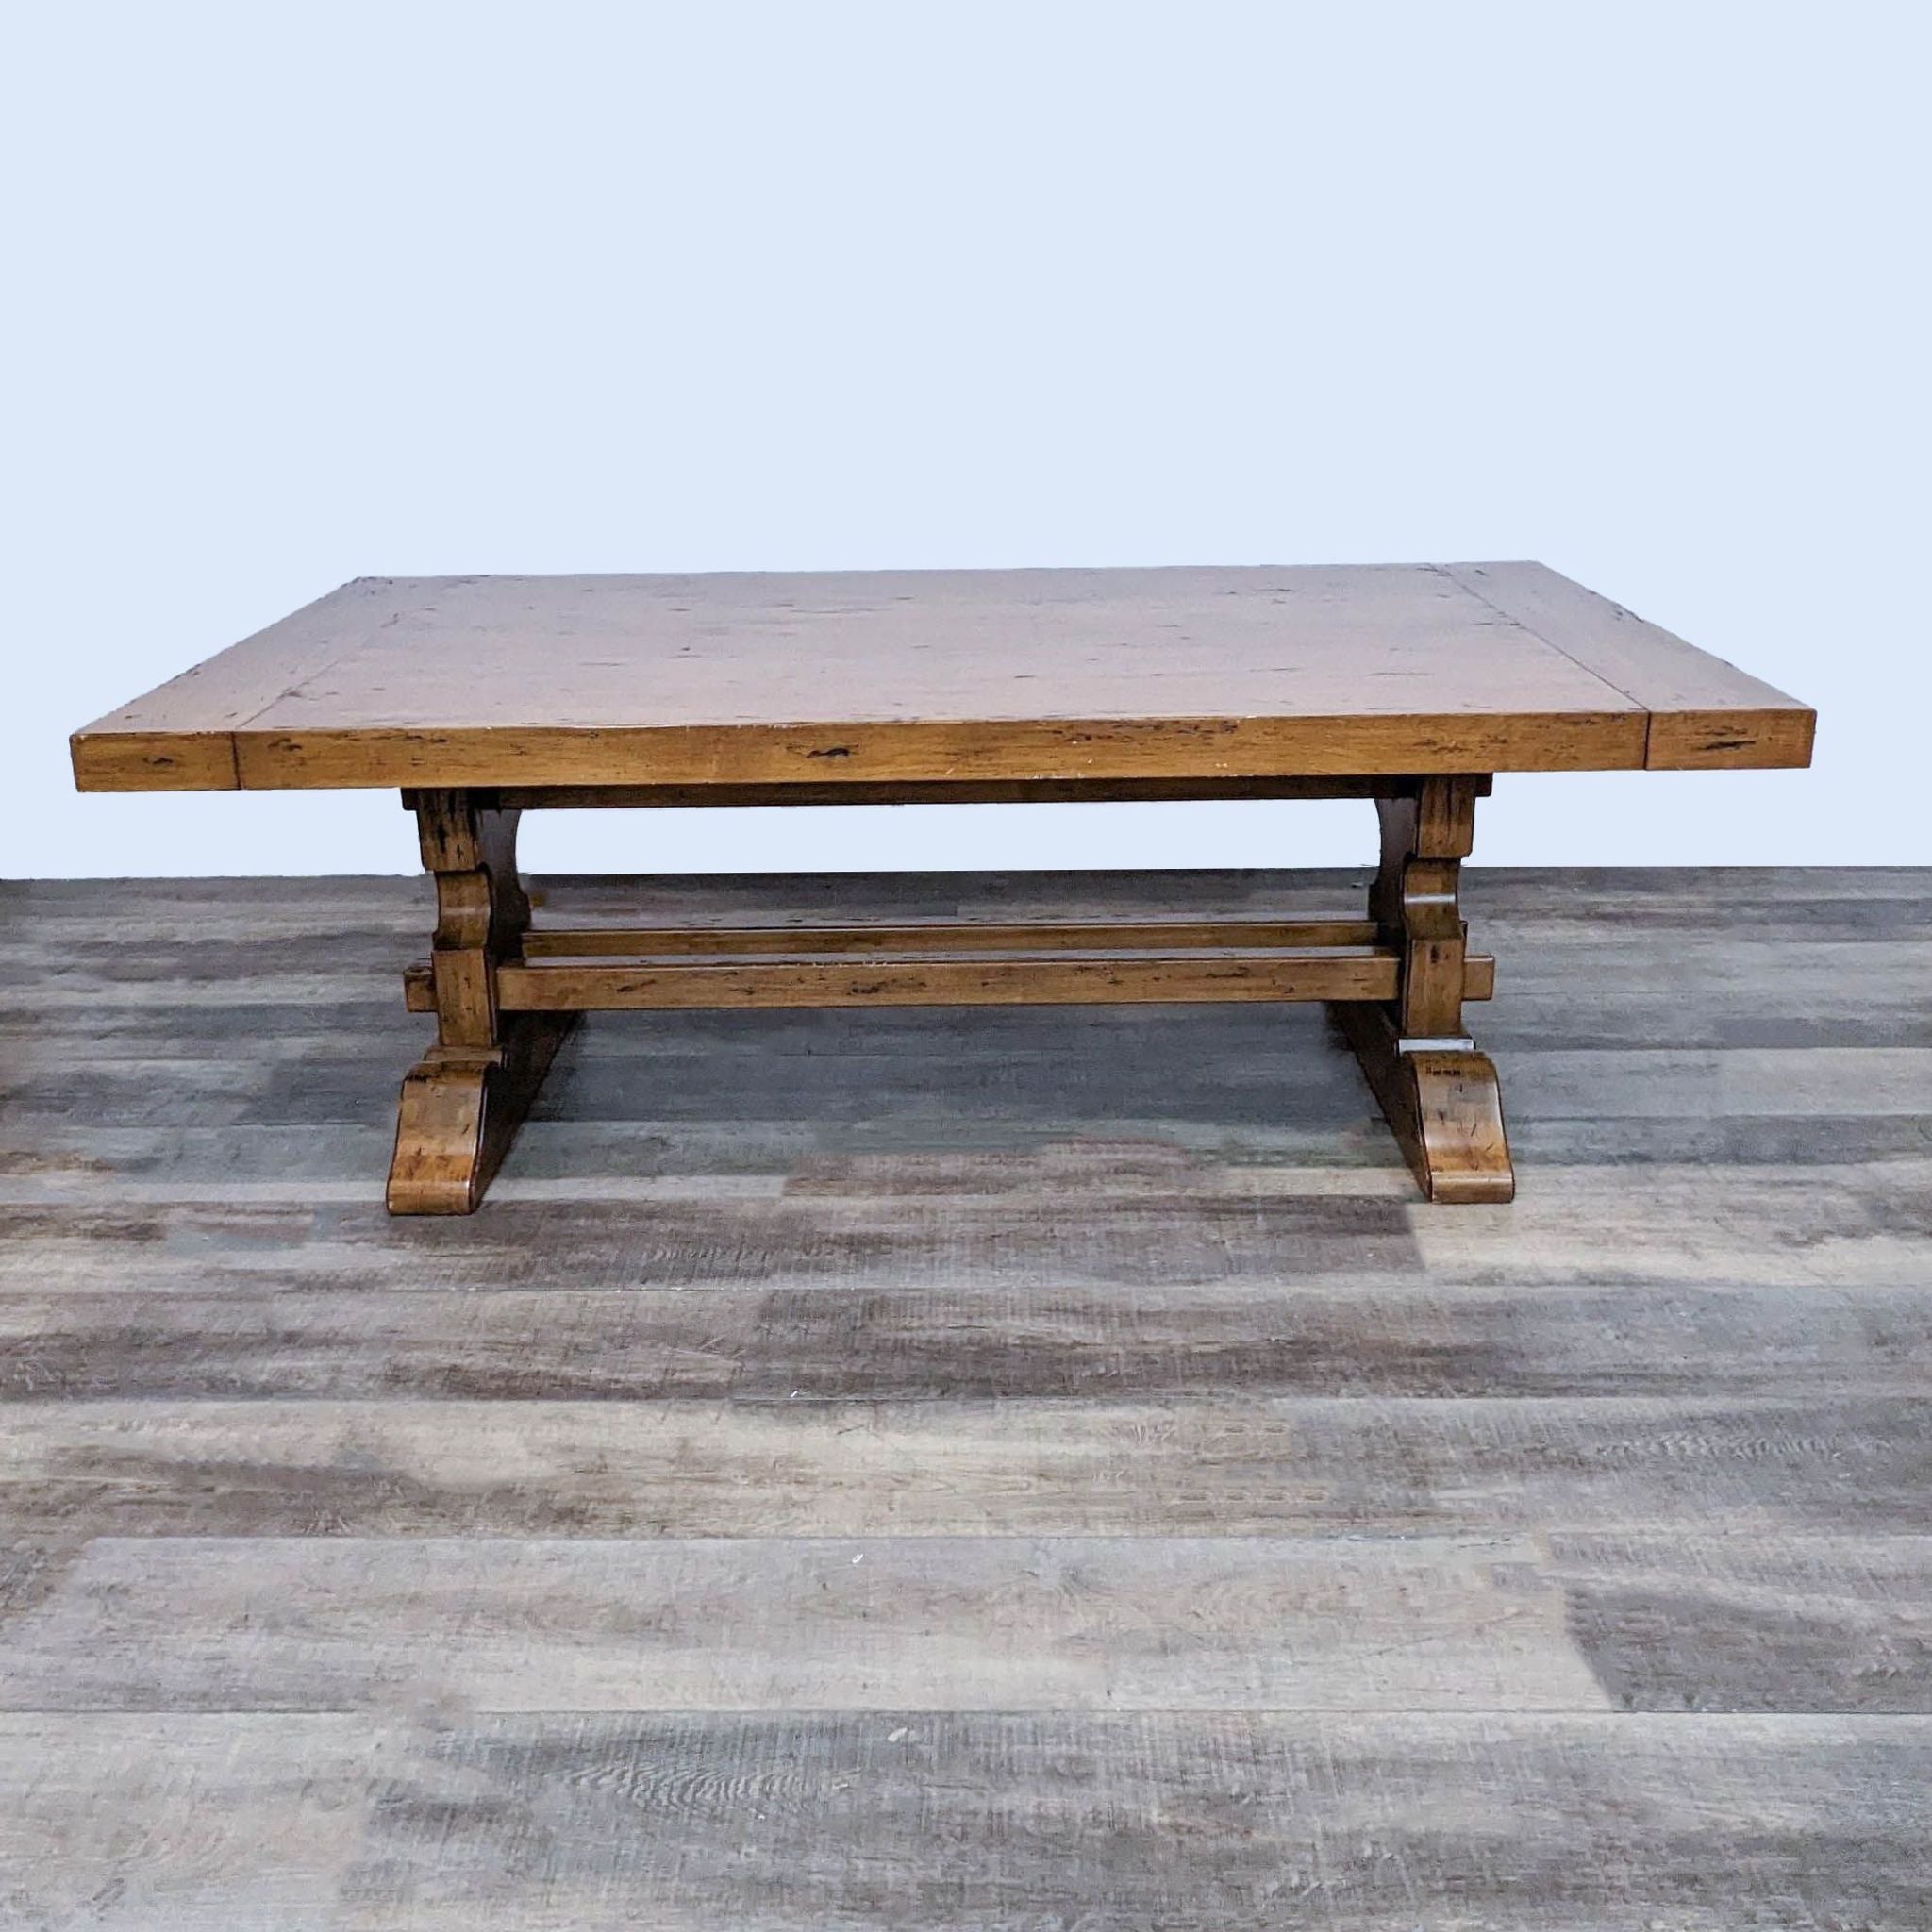 Walter of Wabash trestle base, rectangular, wooden dining table from a 9-piece dining set on a wooden floor.